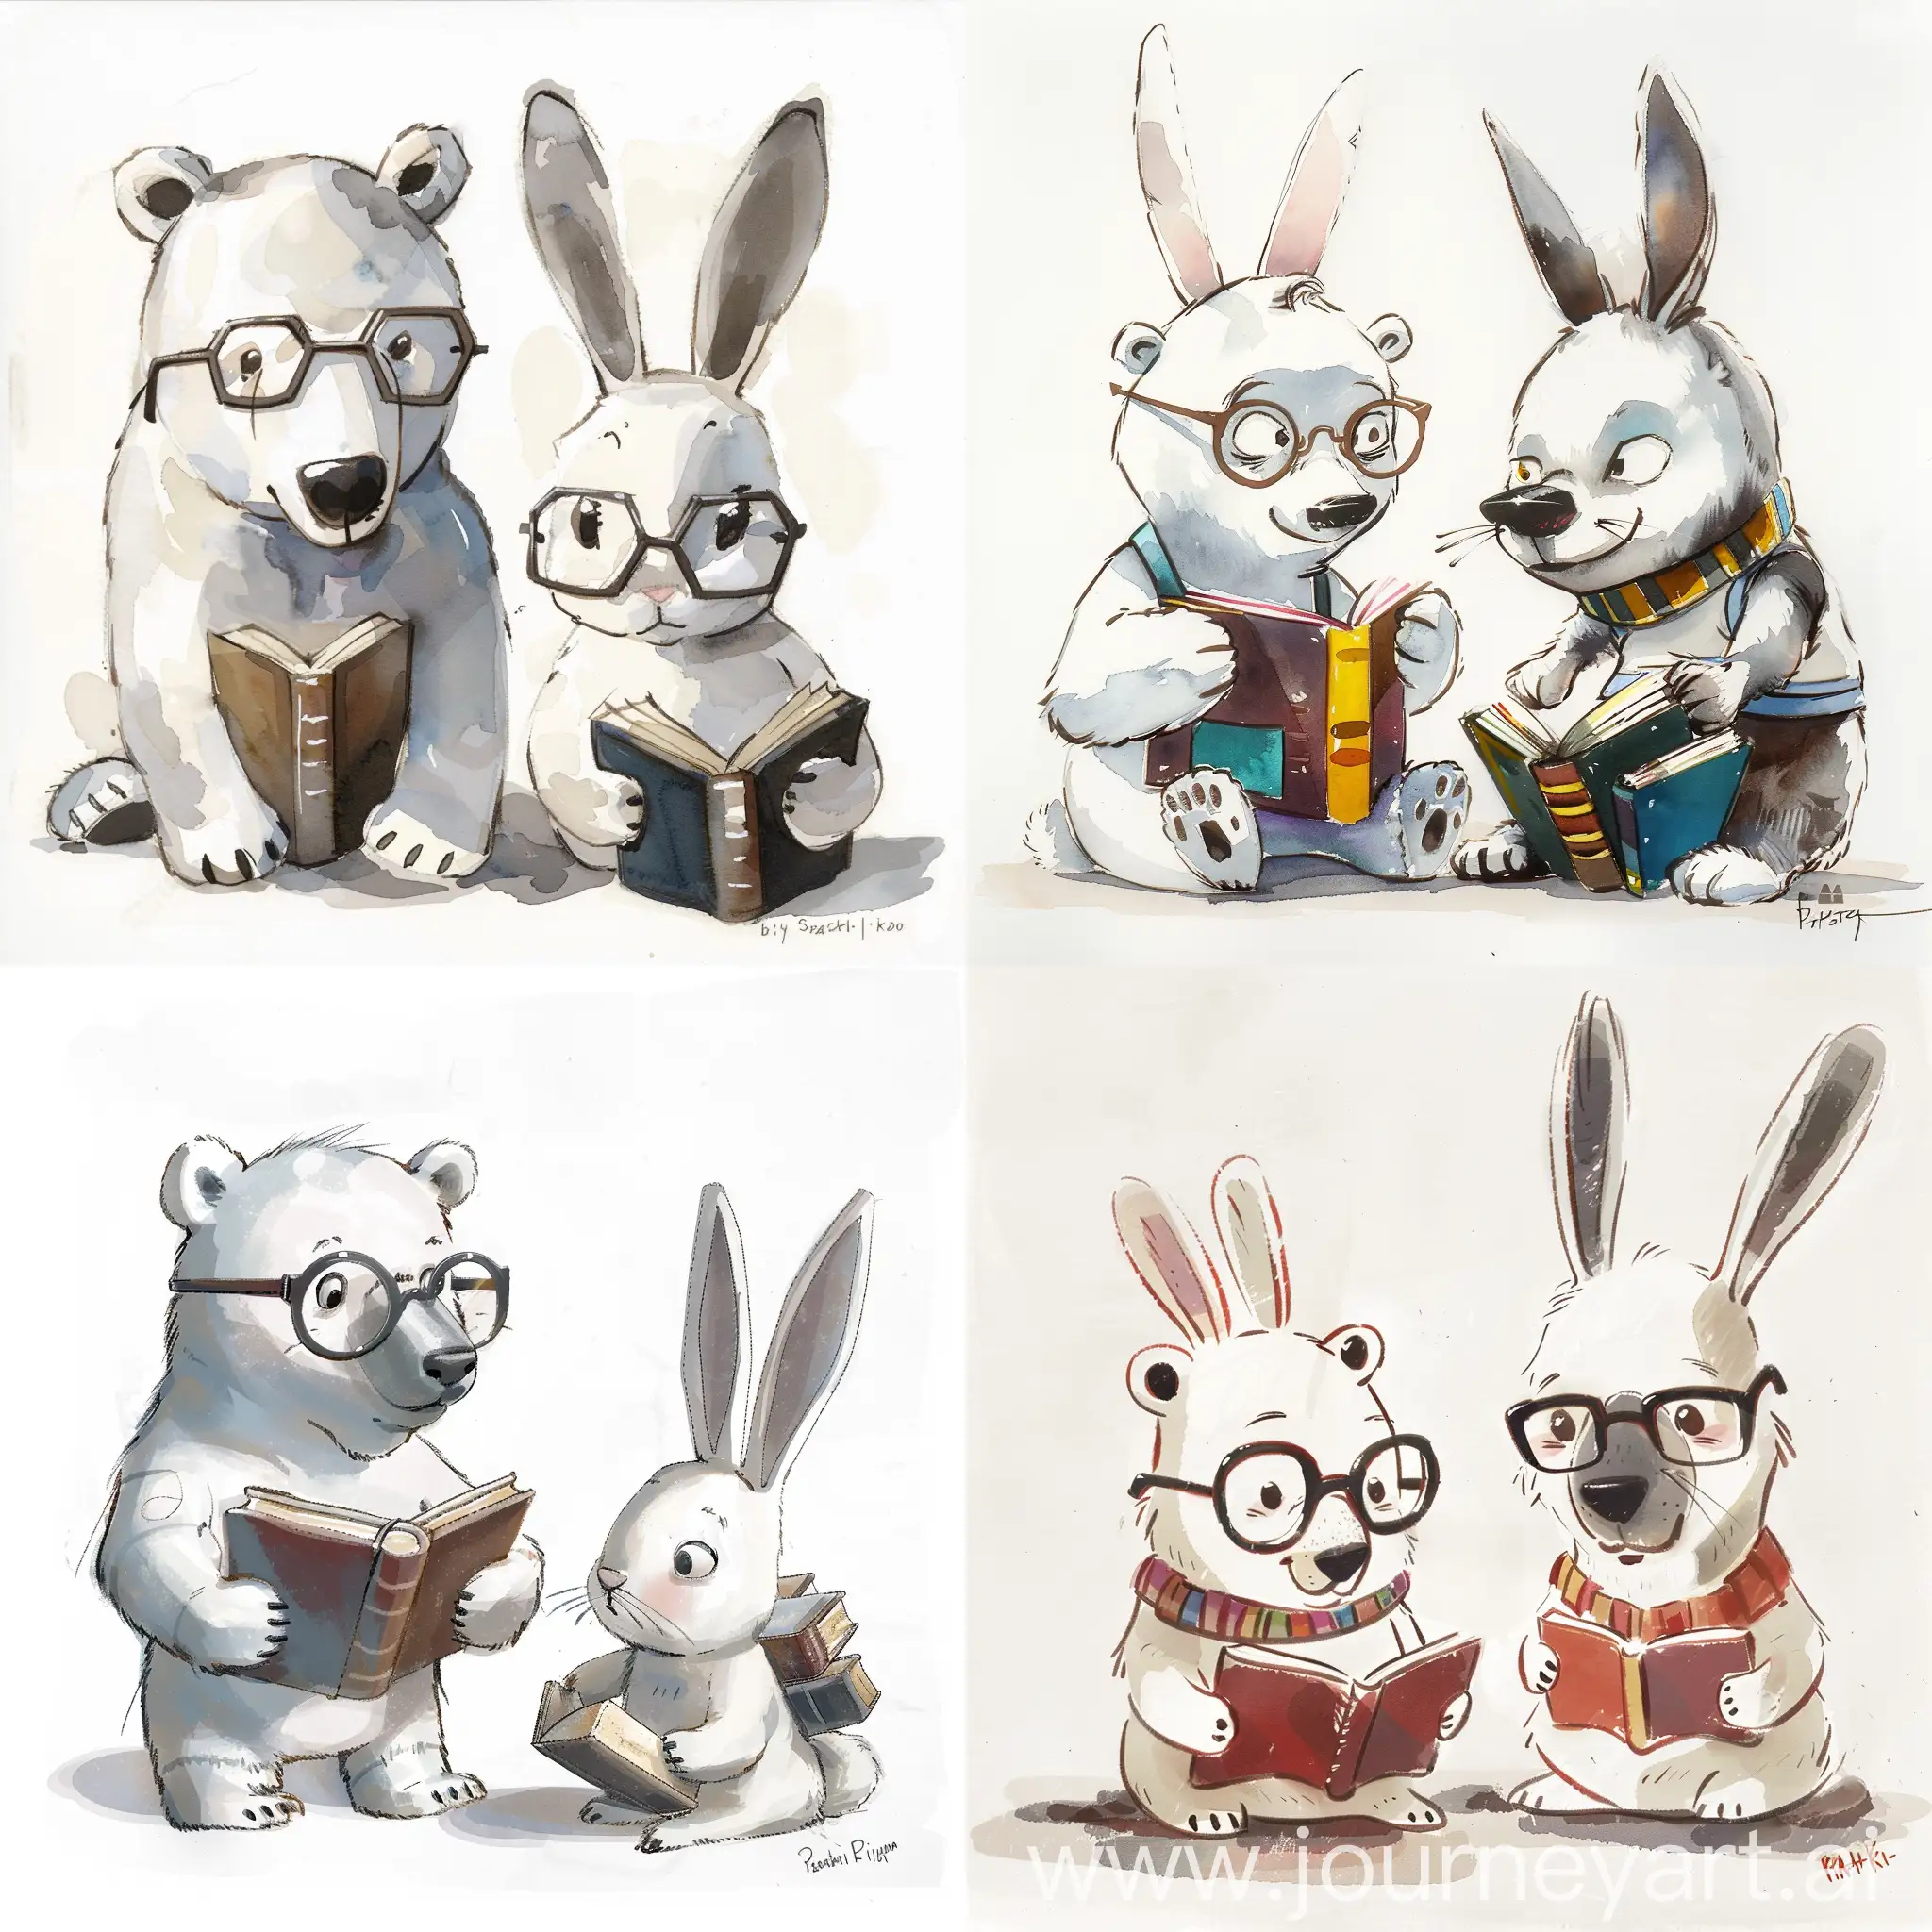 water color painting of polar bear wearing glasses and holding books, * * bunny rabbit wearing glasses and holding books, character has a drop shadow, on white background, foreshortening, bold lines, caricature sketch by Kim Jung Gi and by Satoshi Kon disney pixar inspired painting